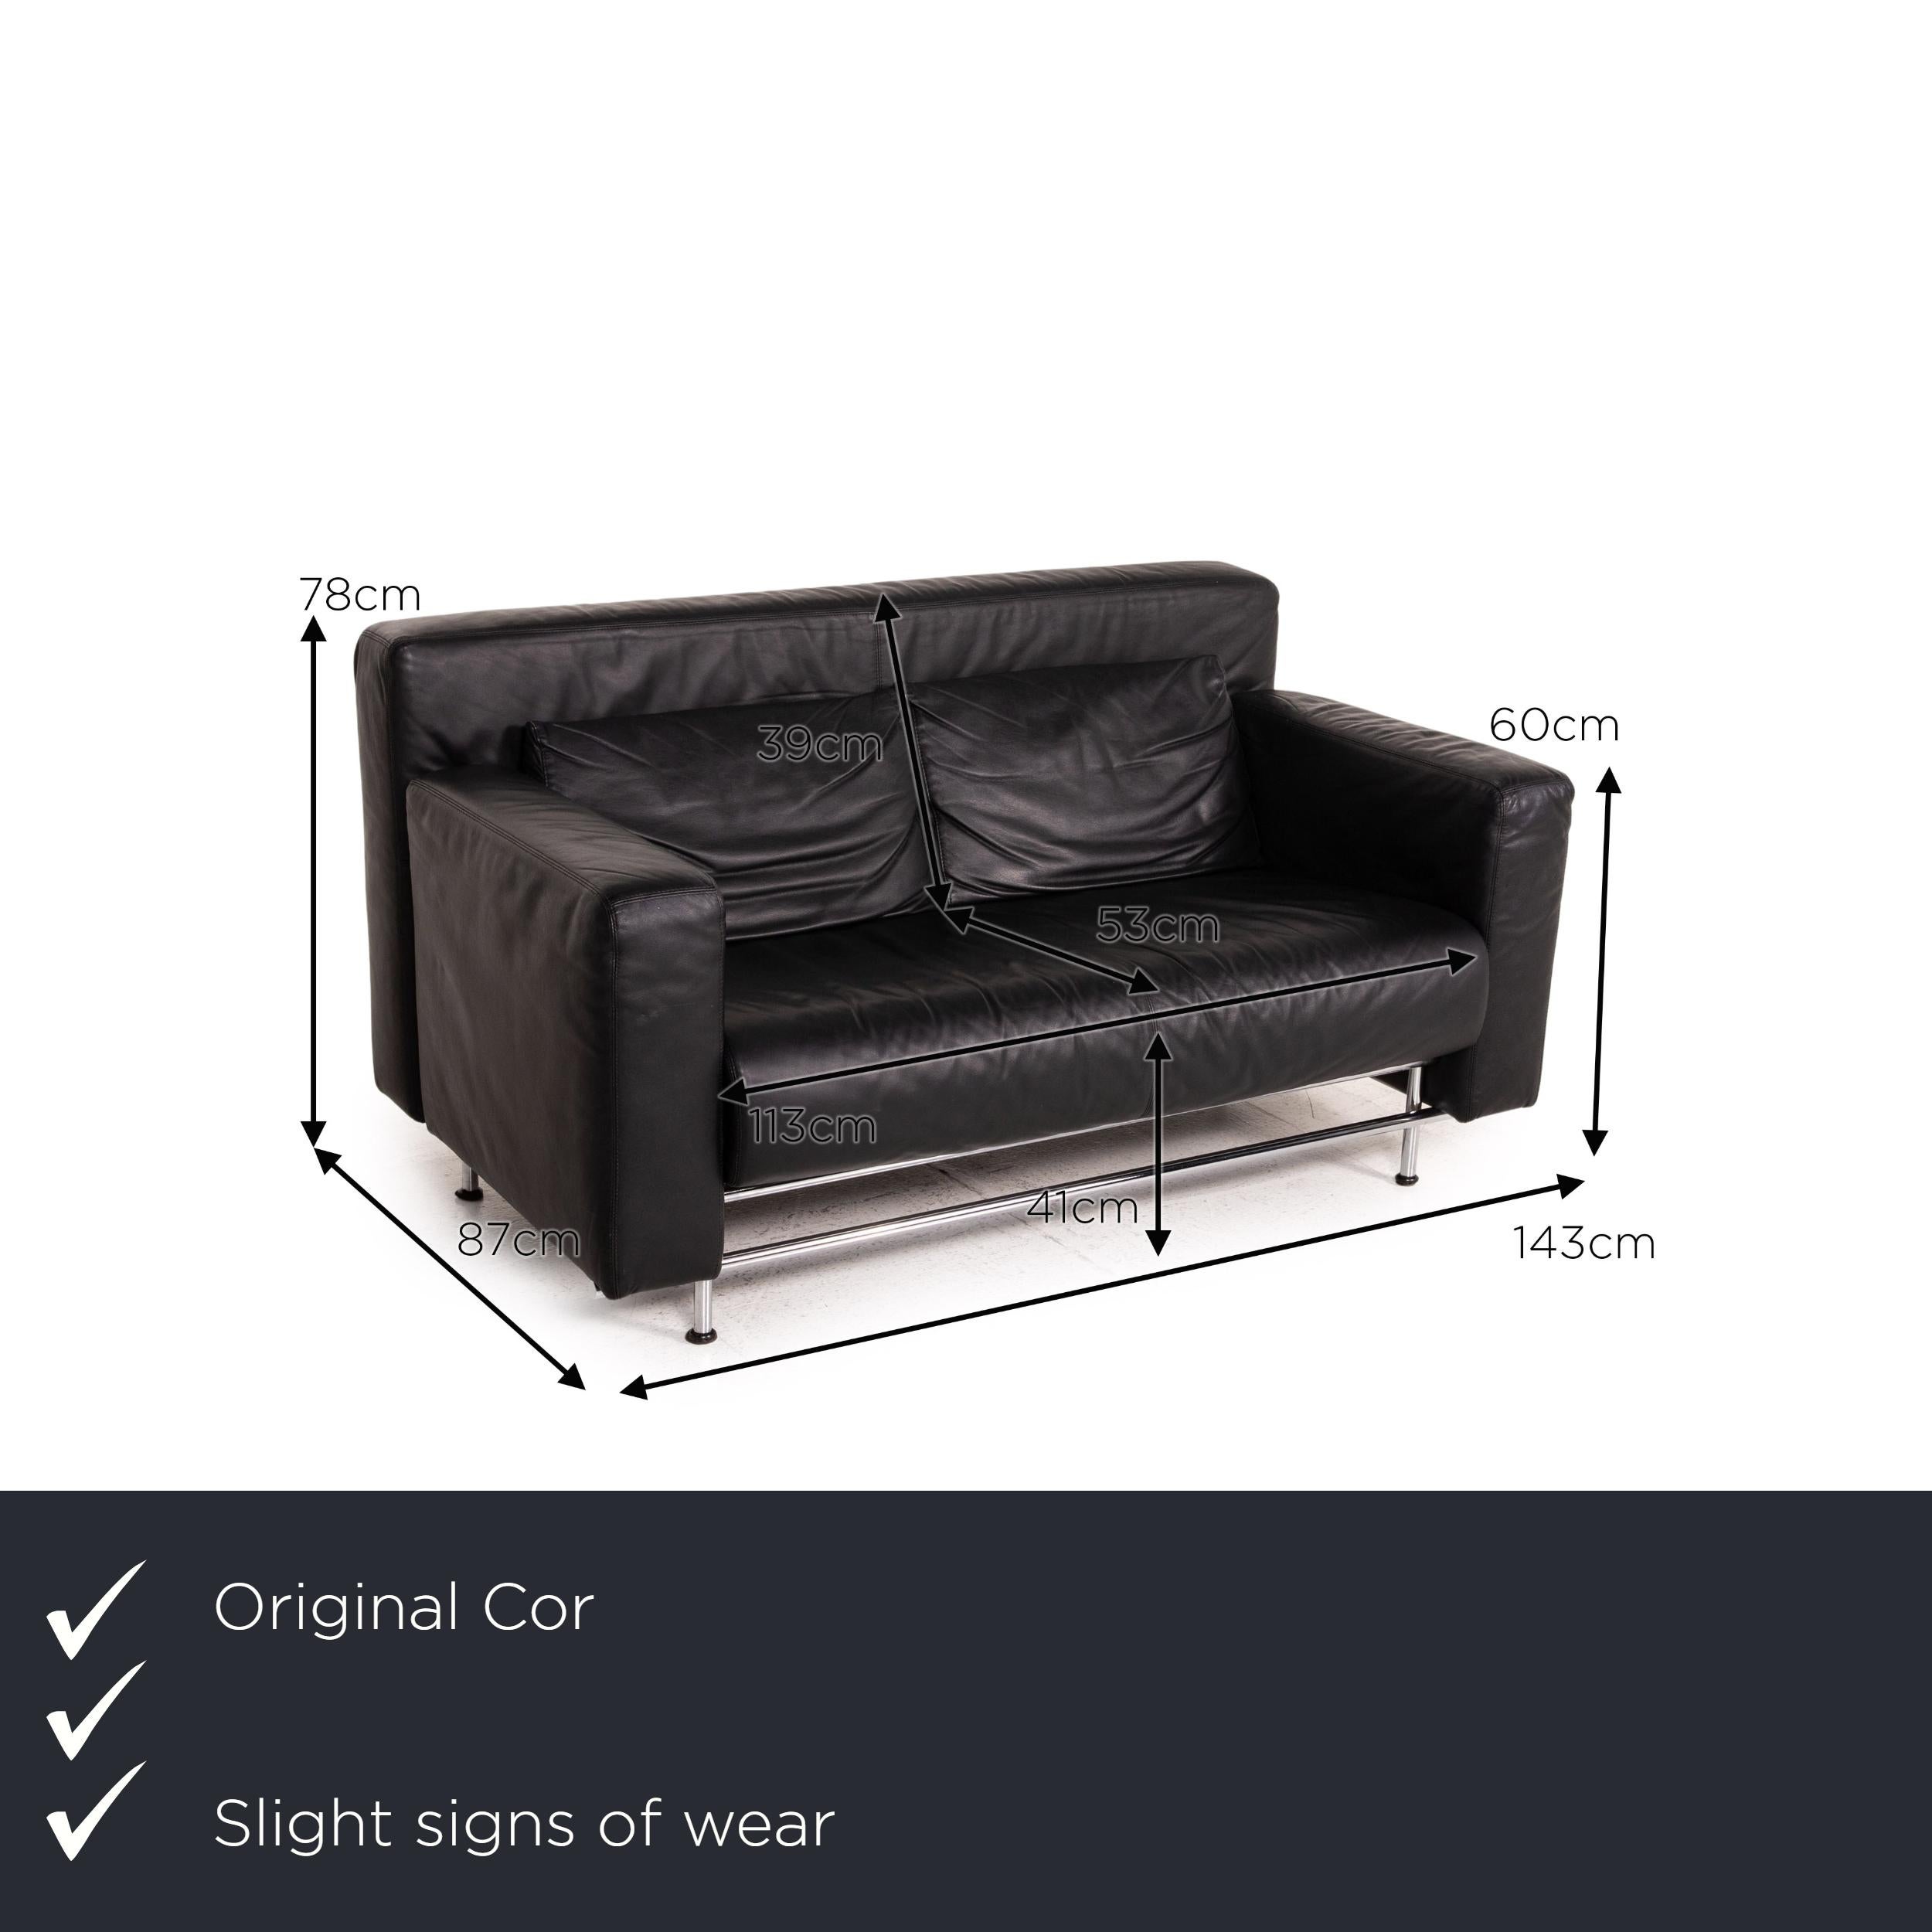 We present to you a COR Quarta leather sofa black two-seater couch.


 Product measurements in centimeters:
 

Depth: 87
Width: 143
Height: 78
Seat height: 41
Rest height: 60
Seat depth: 53
Seat width: 113
Back height: 39.

  